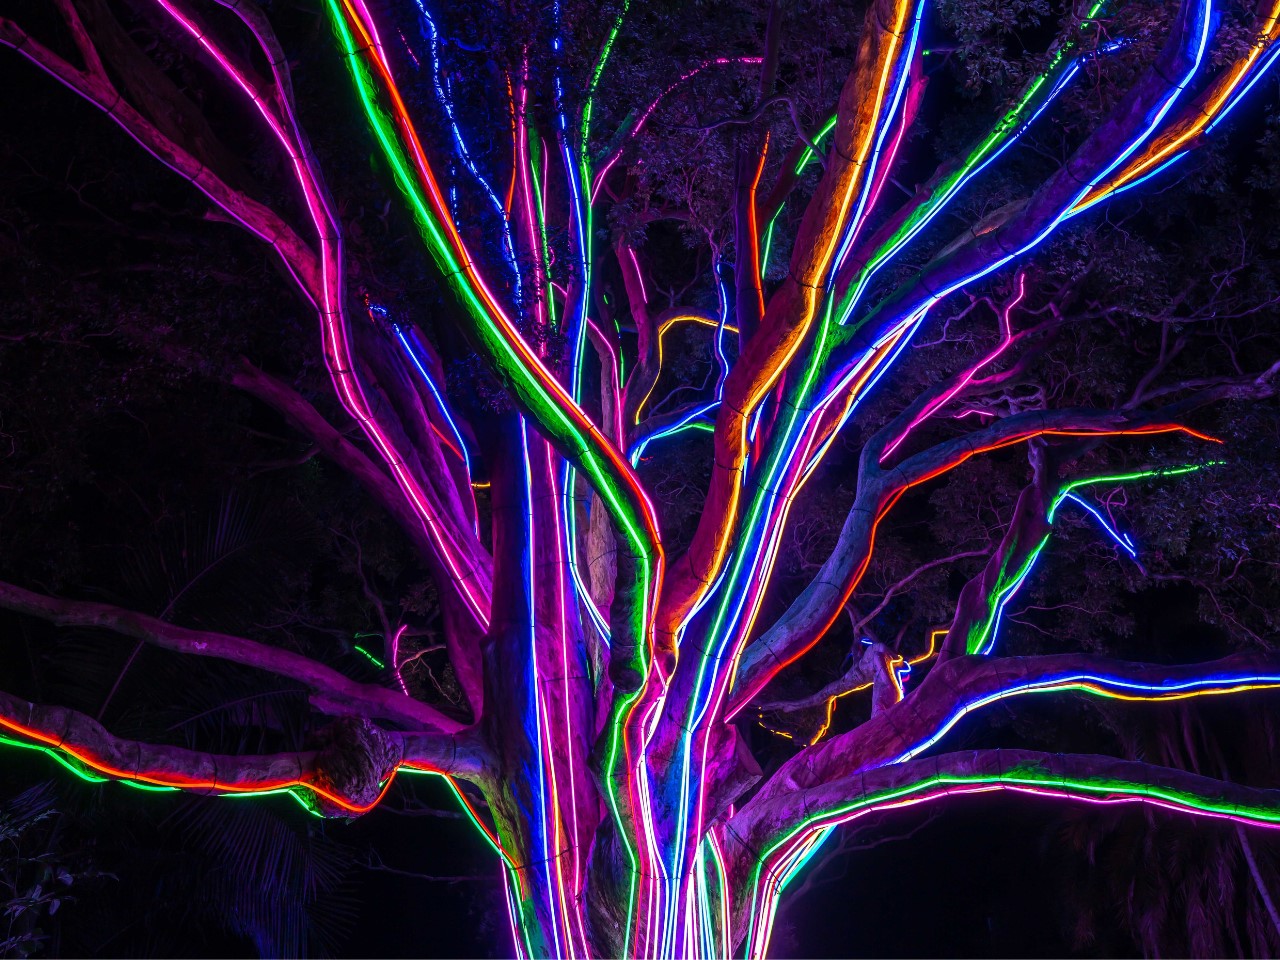 Image of a tree with multicolour neon lights on the branches